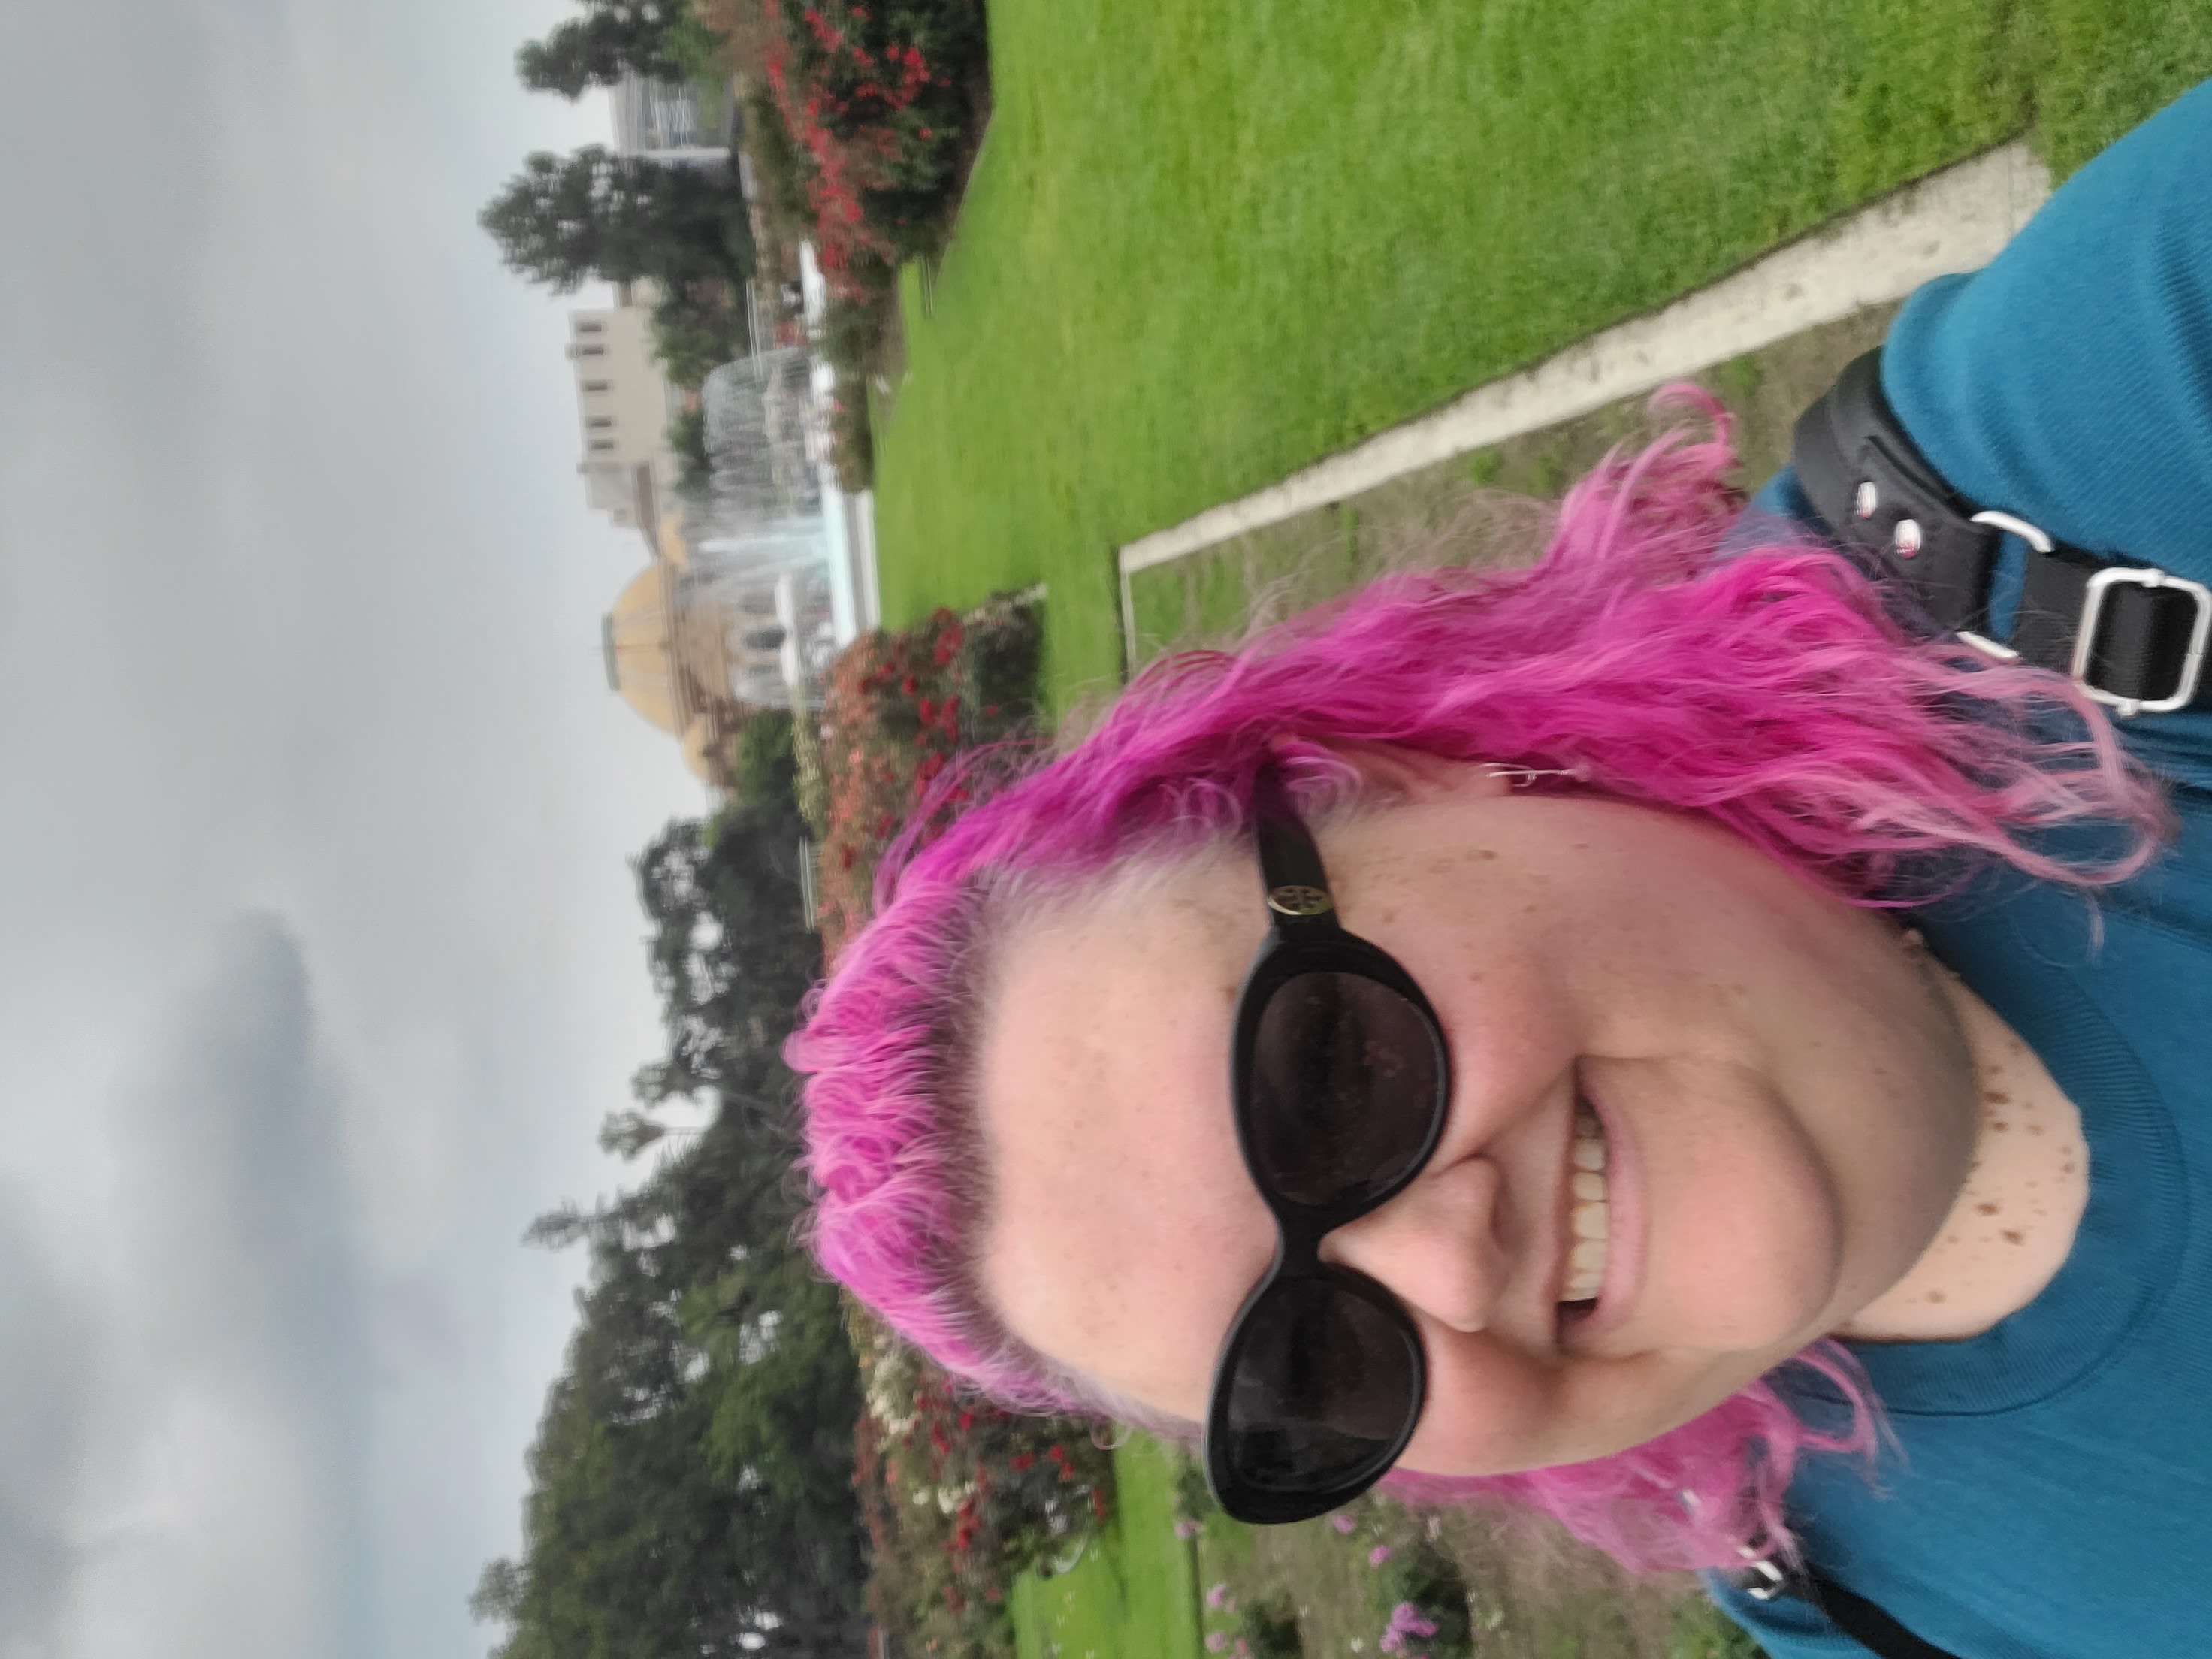 A woman with pink hair, sunglasses, and a blue shirt smiles with a fountain and the Natural History Museum in the background